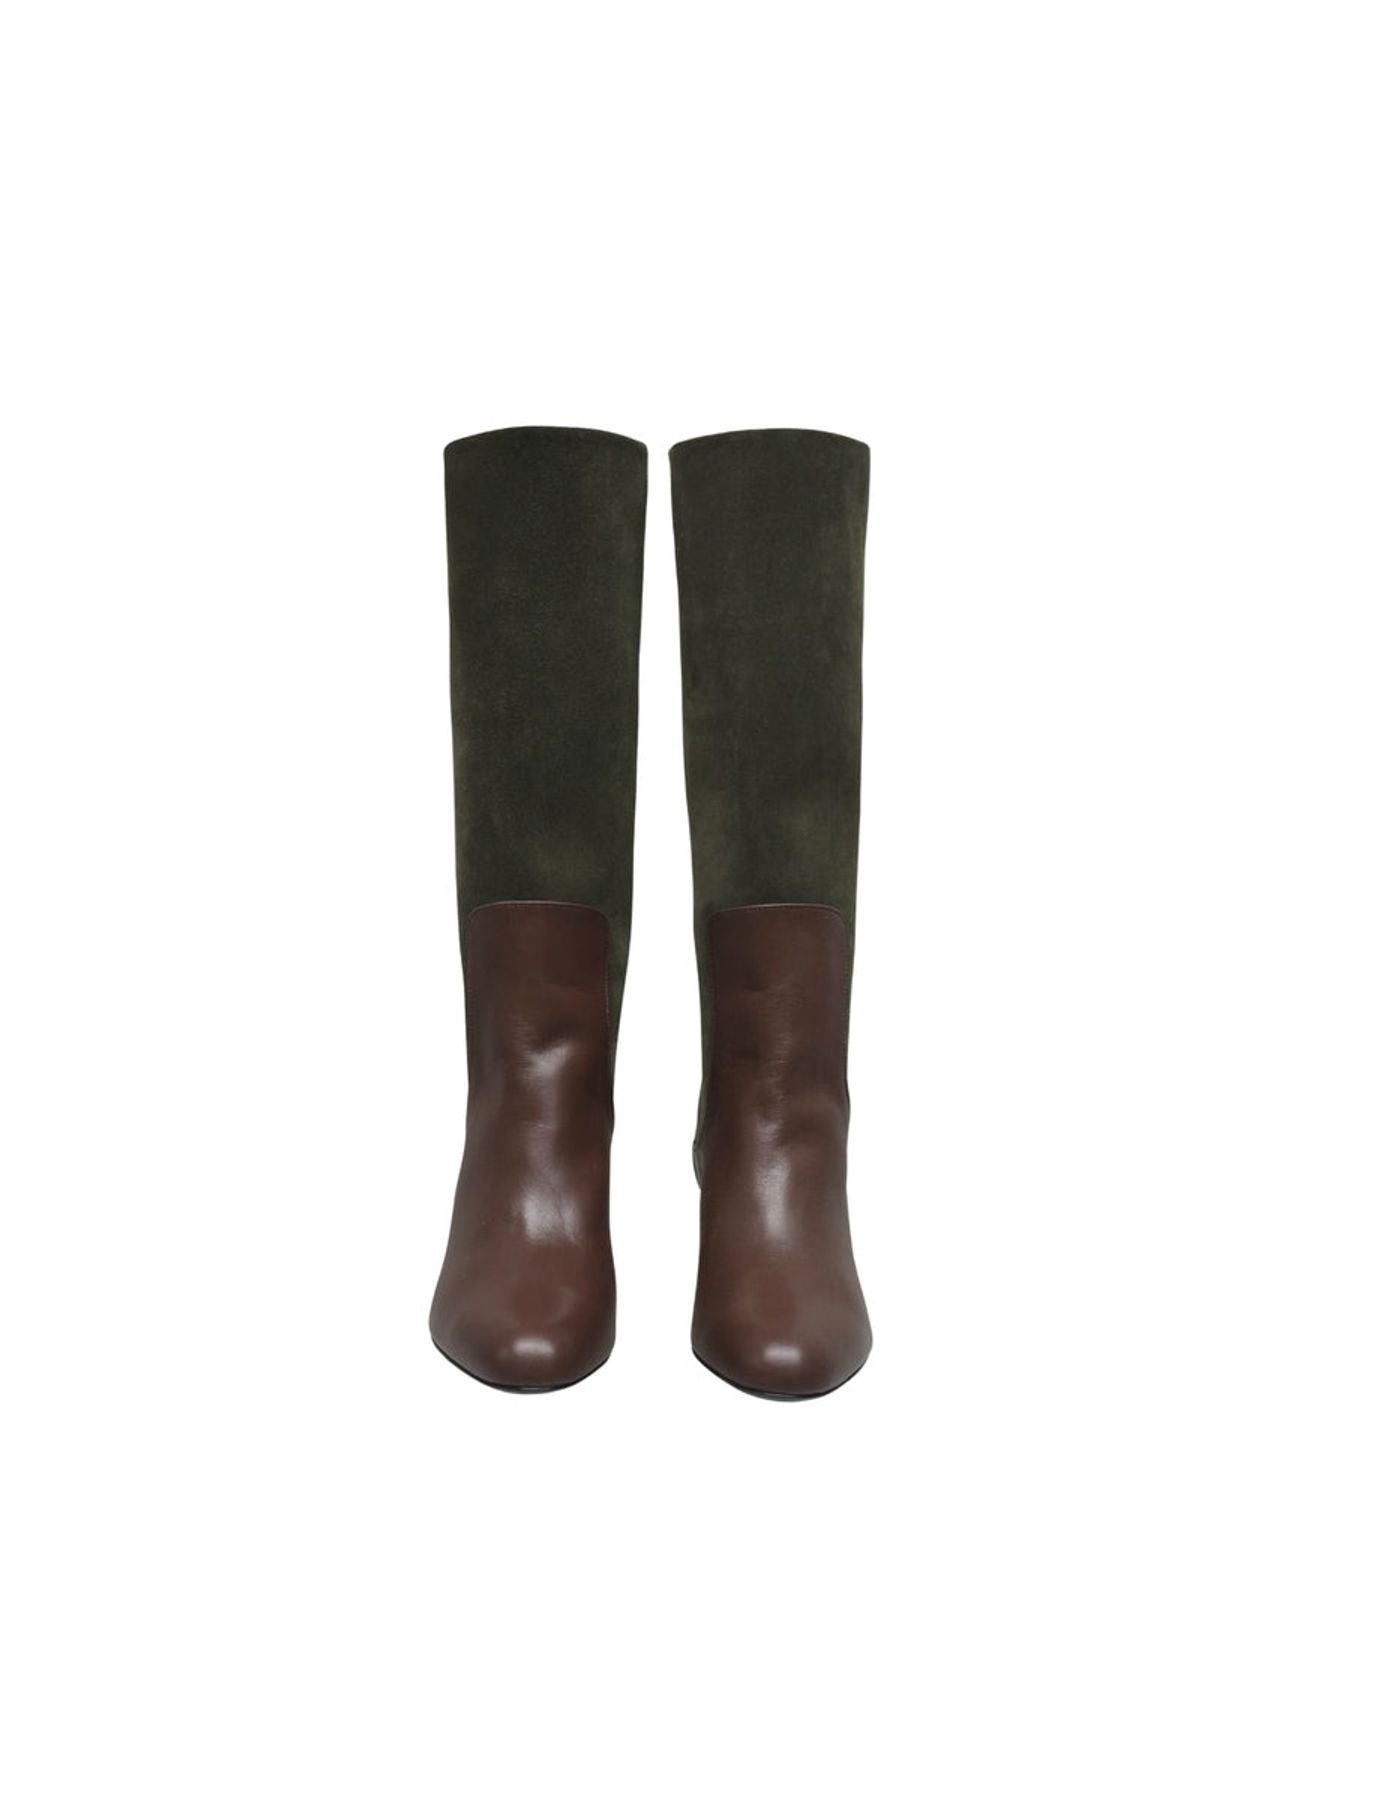 boots-a-talons-green-and-brown-in-leather